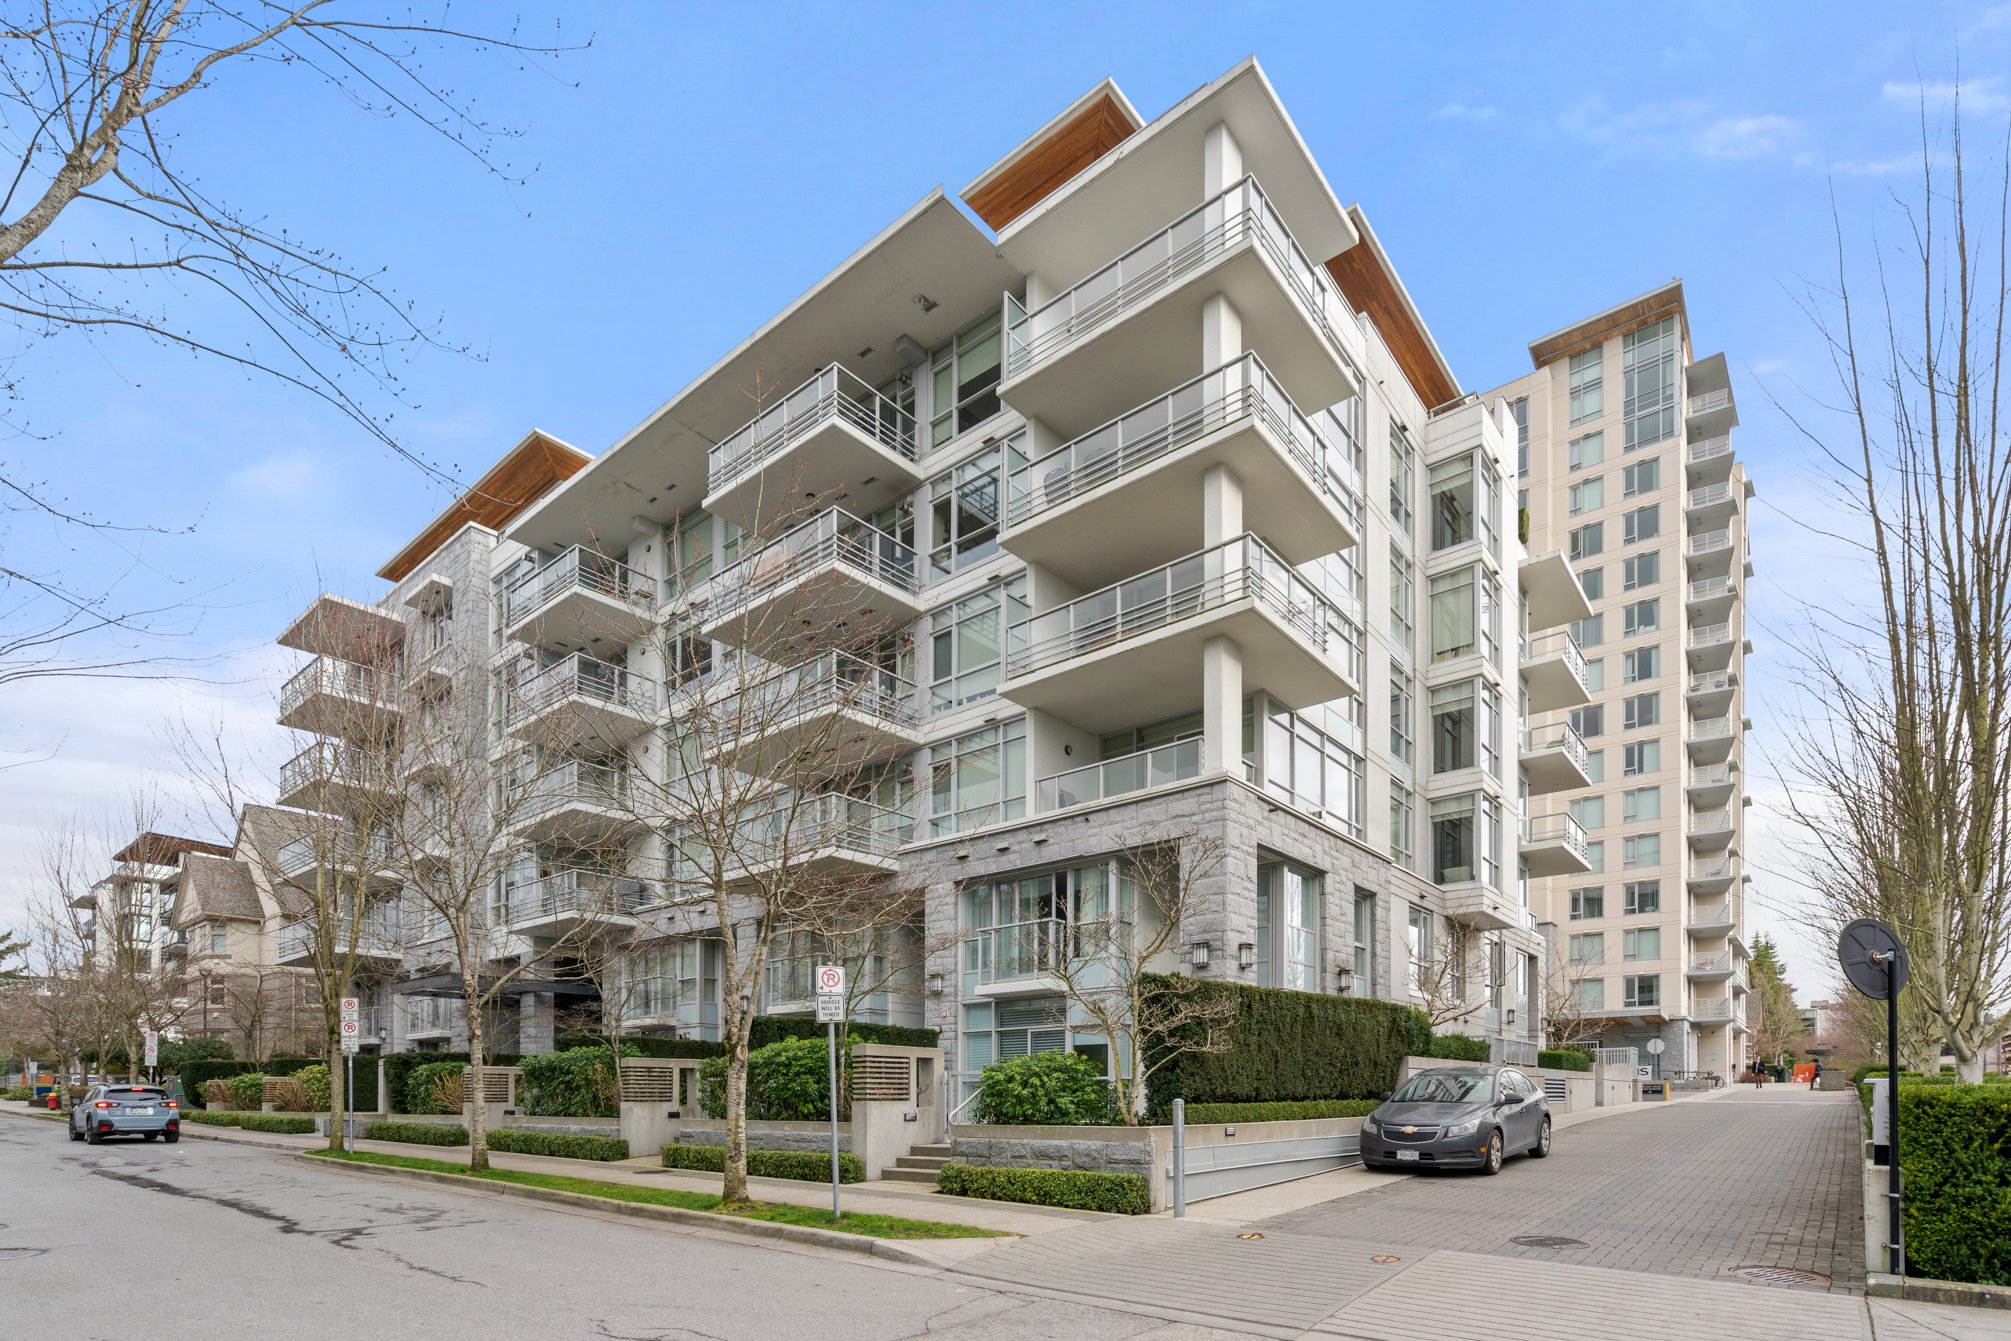 506 6080 Iona Dr Vancouver 03.jpg